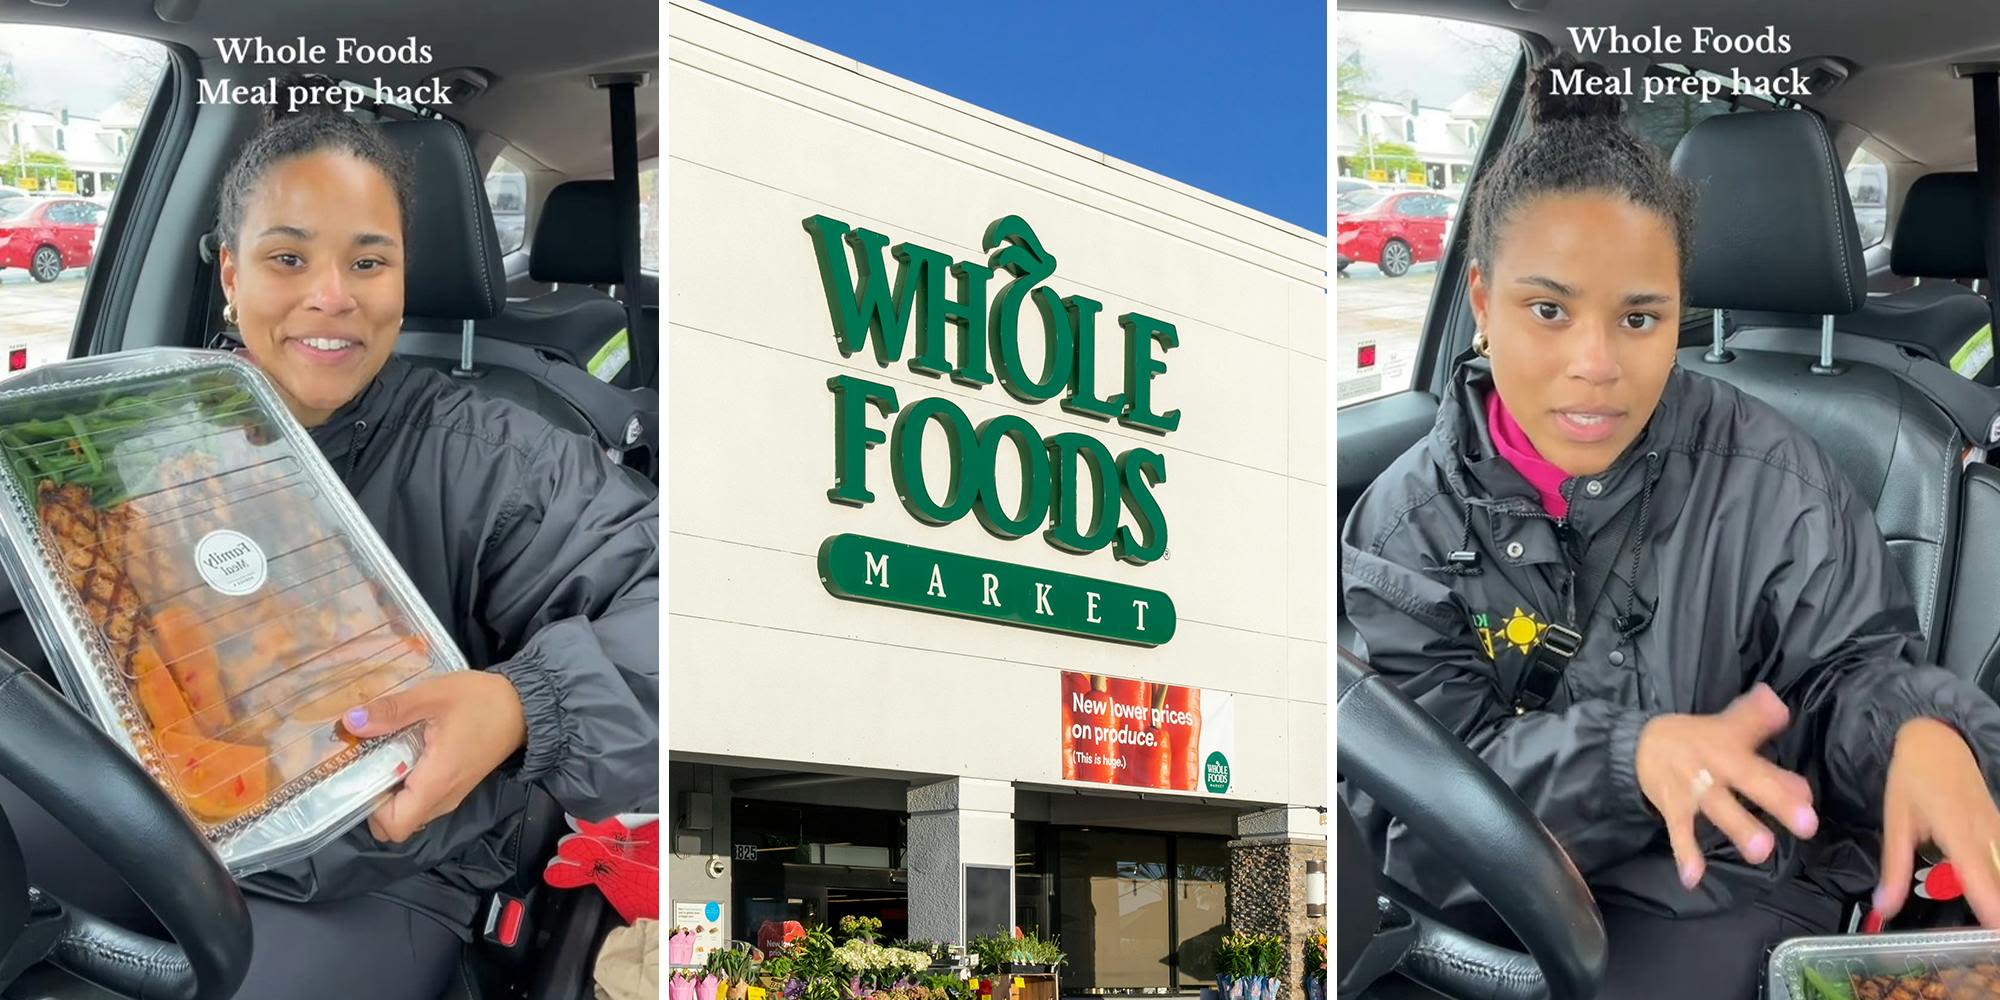 'I thought it was a steal': Shopper tries Whole Foods meal prep hack, says it's cheaper than just buying salmon